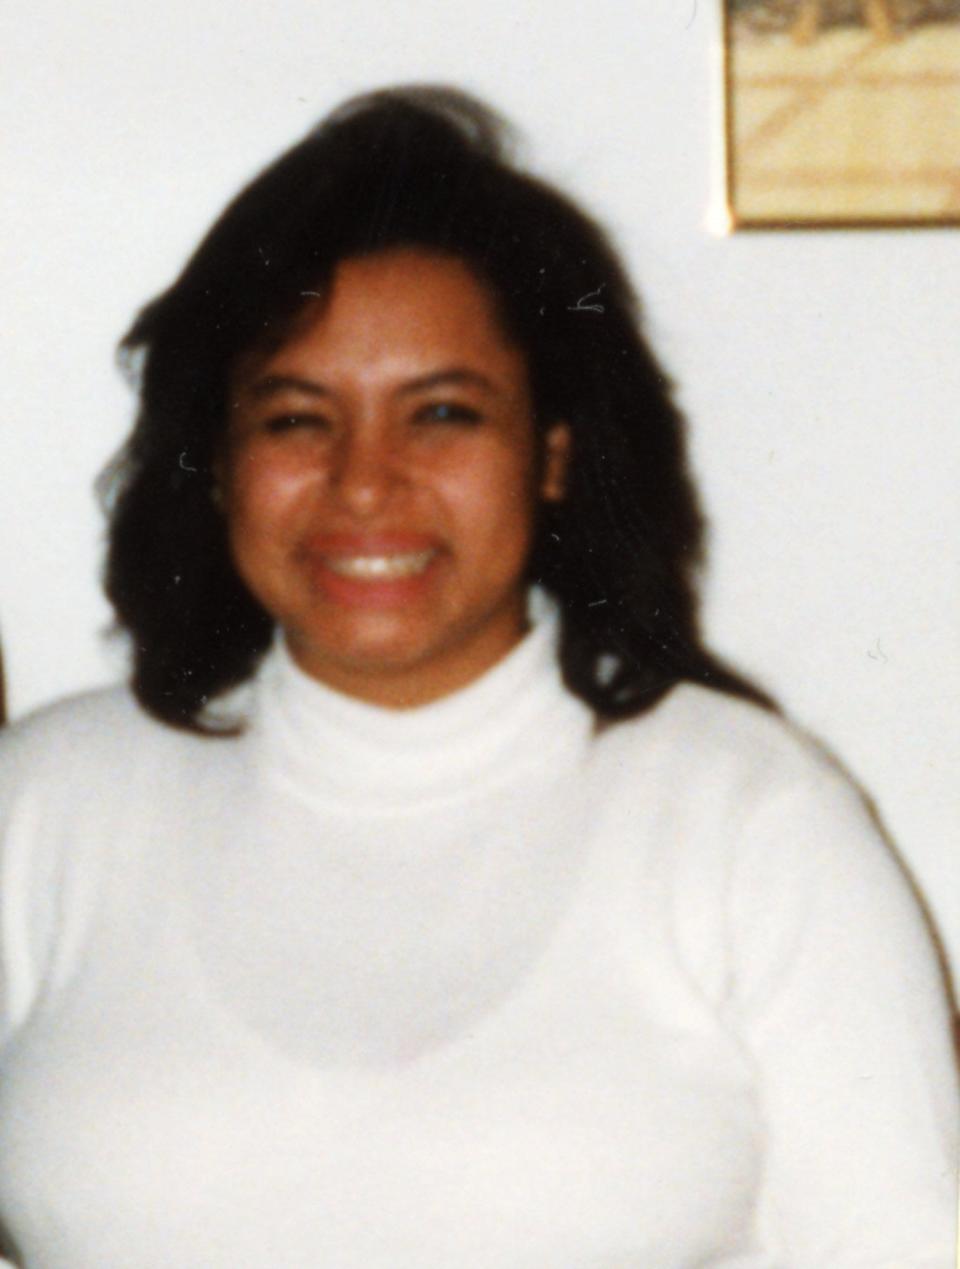 Nusinaida Ramos, 34-year-old mother of two killed in her Colin Street apartment in Yonkers on March 9, 1997
-